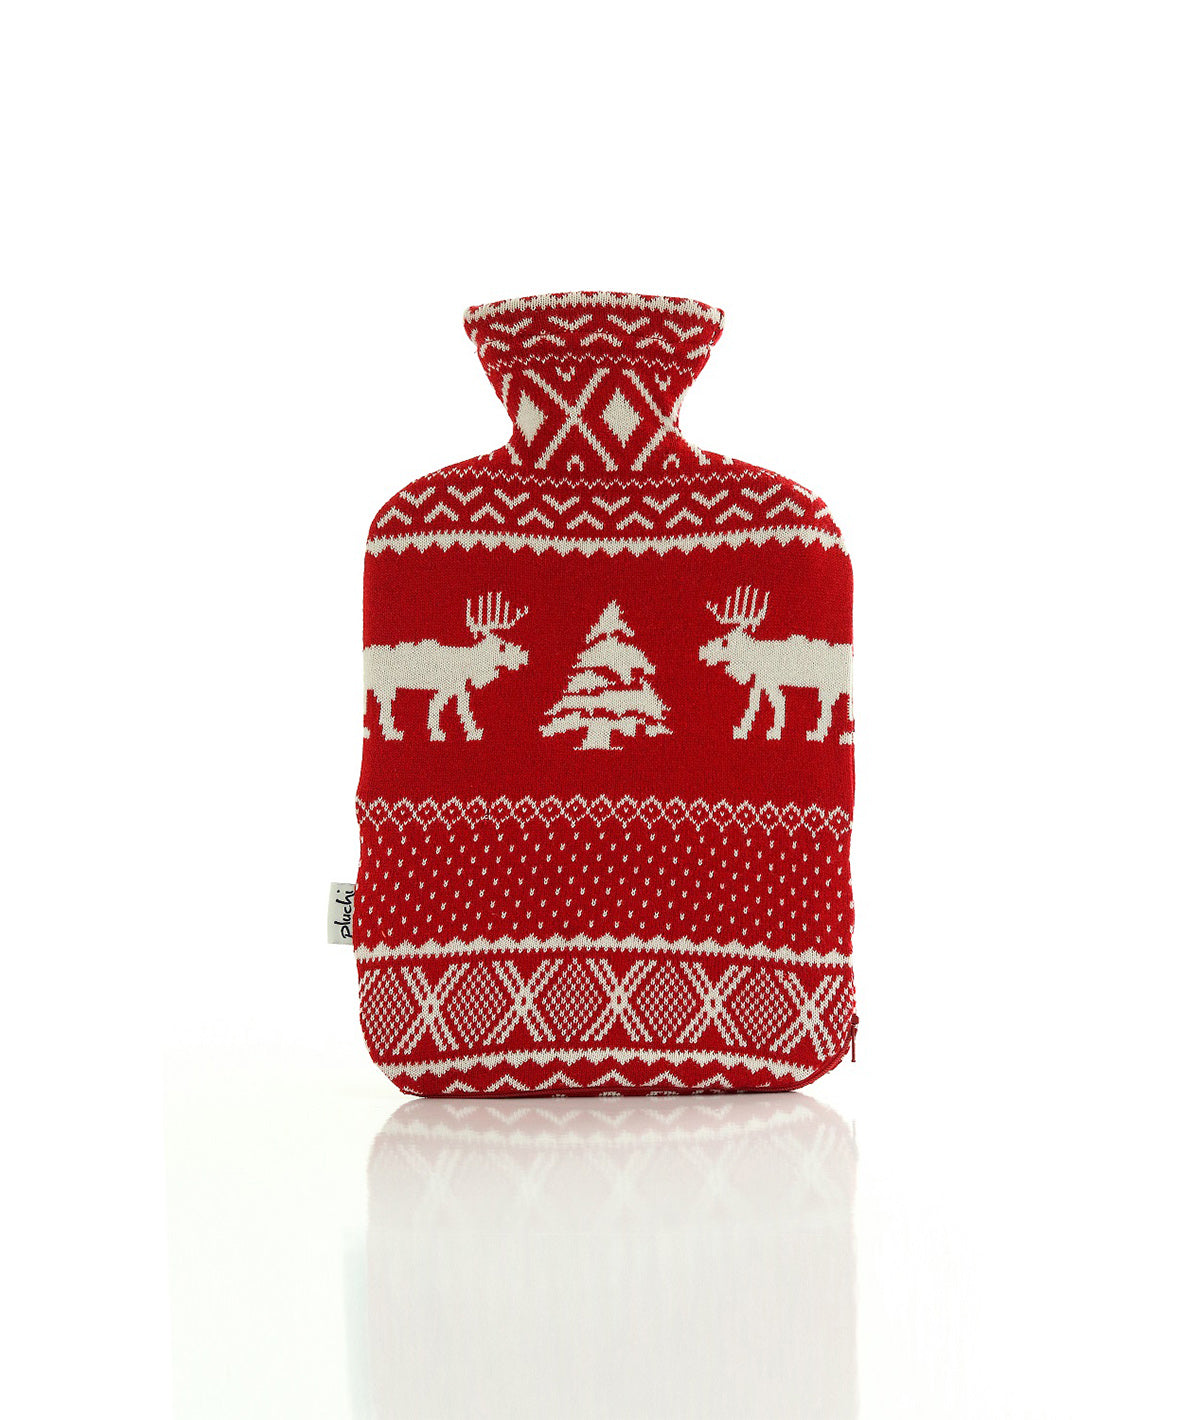 X-Citing X-Mas Non Allergic Cotton Hot Water Bottle Cover in Red Color